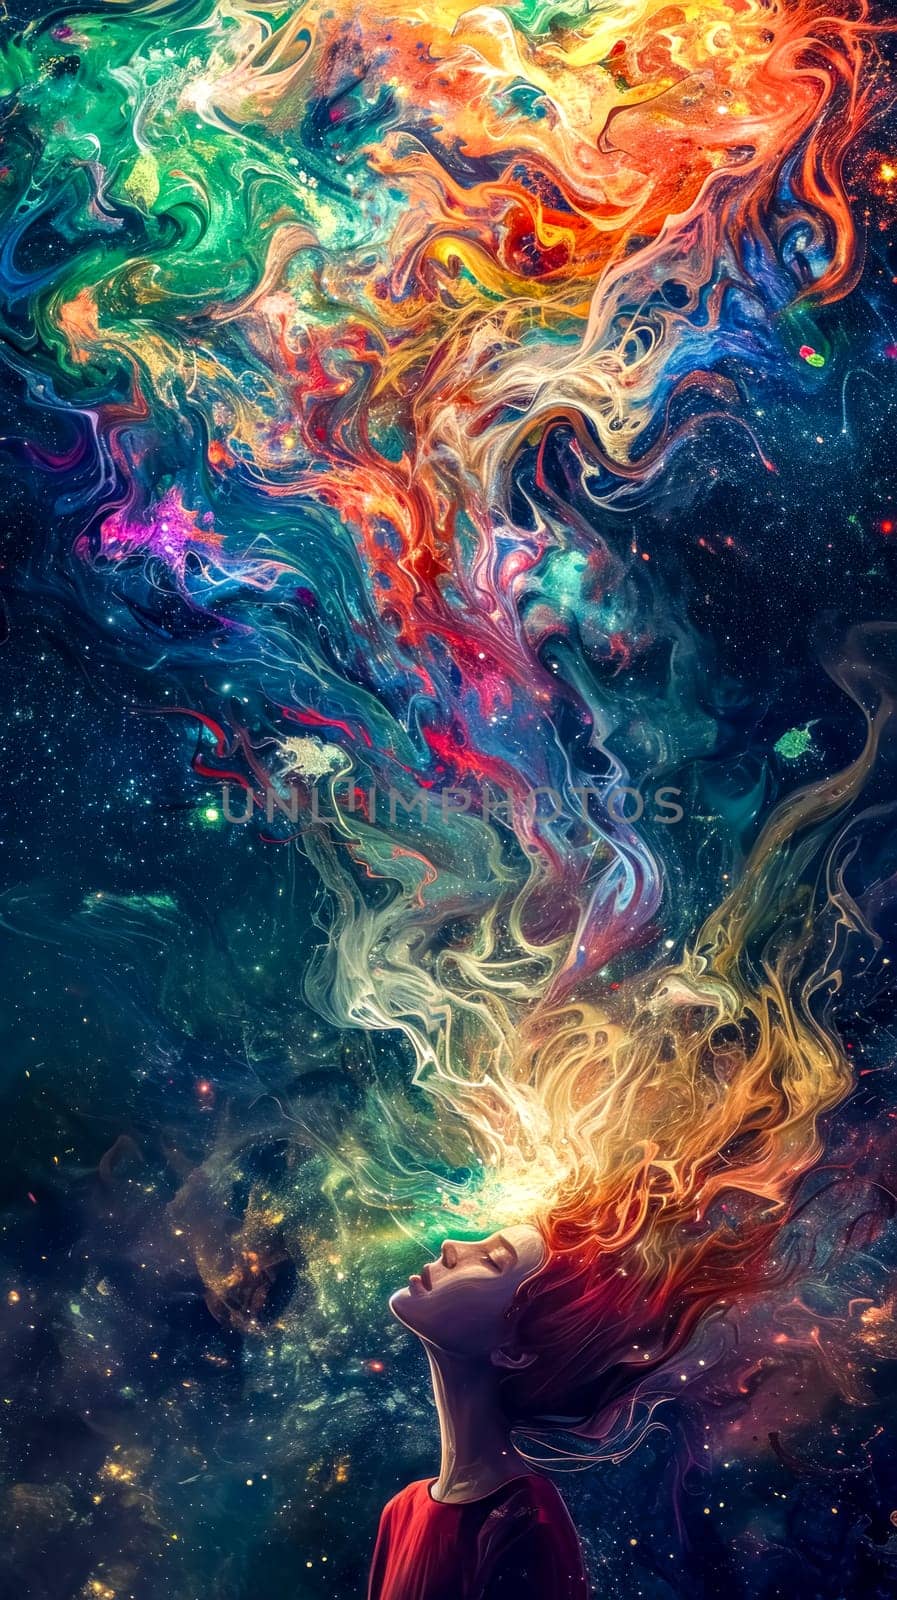 depiction of a person with their head tilted back, hair flowing upwards and transforming into a mesmerizing swirl of cosmic colors, blending with the starry expanse of space, vertical